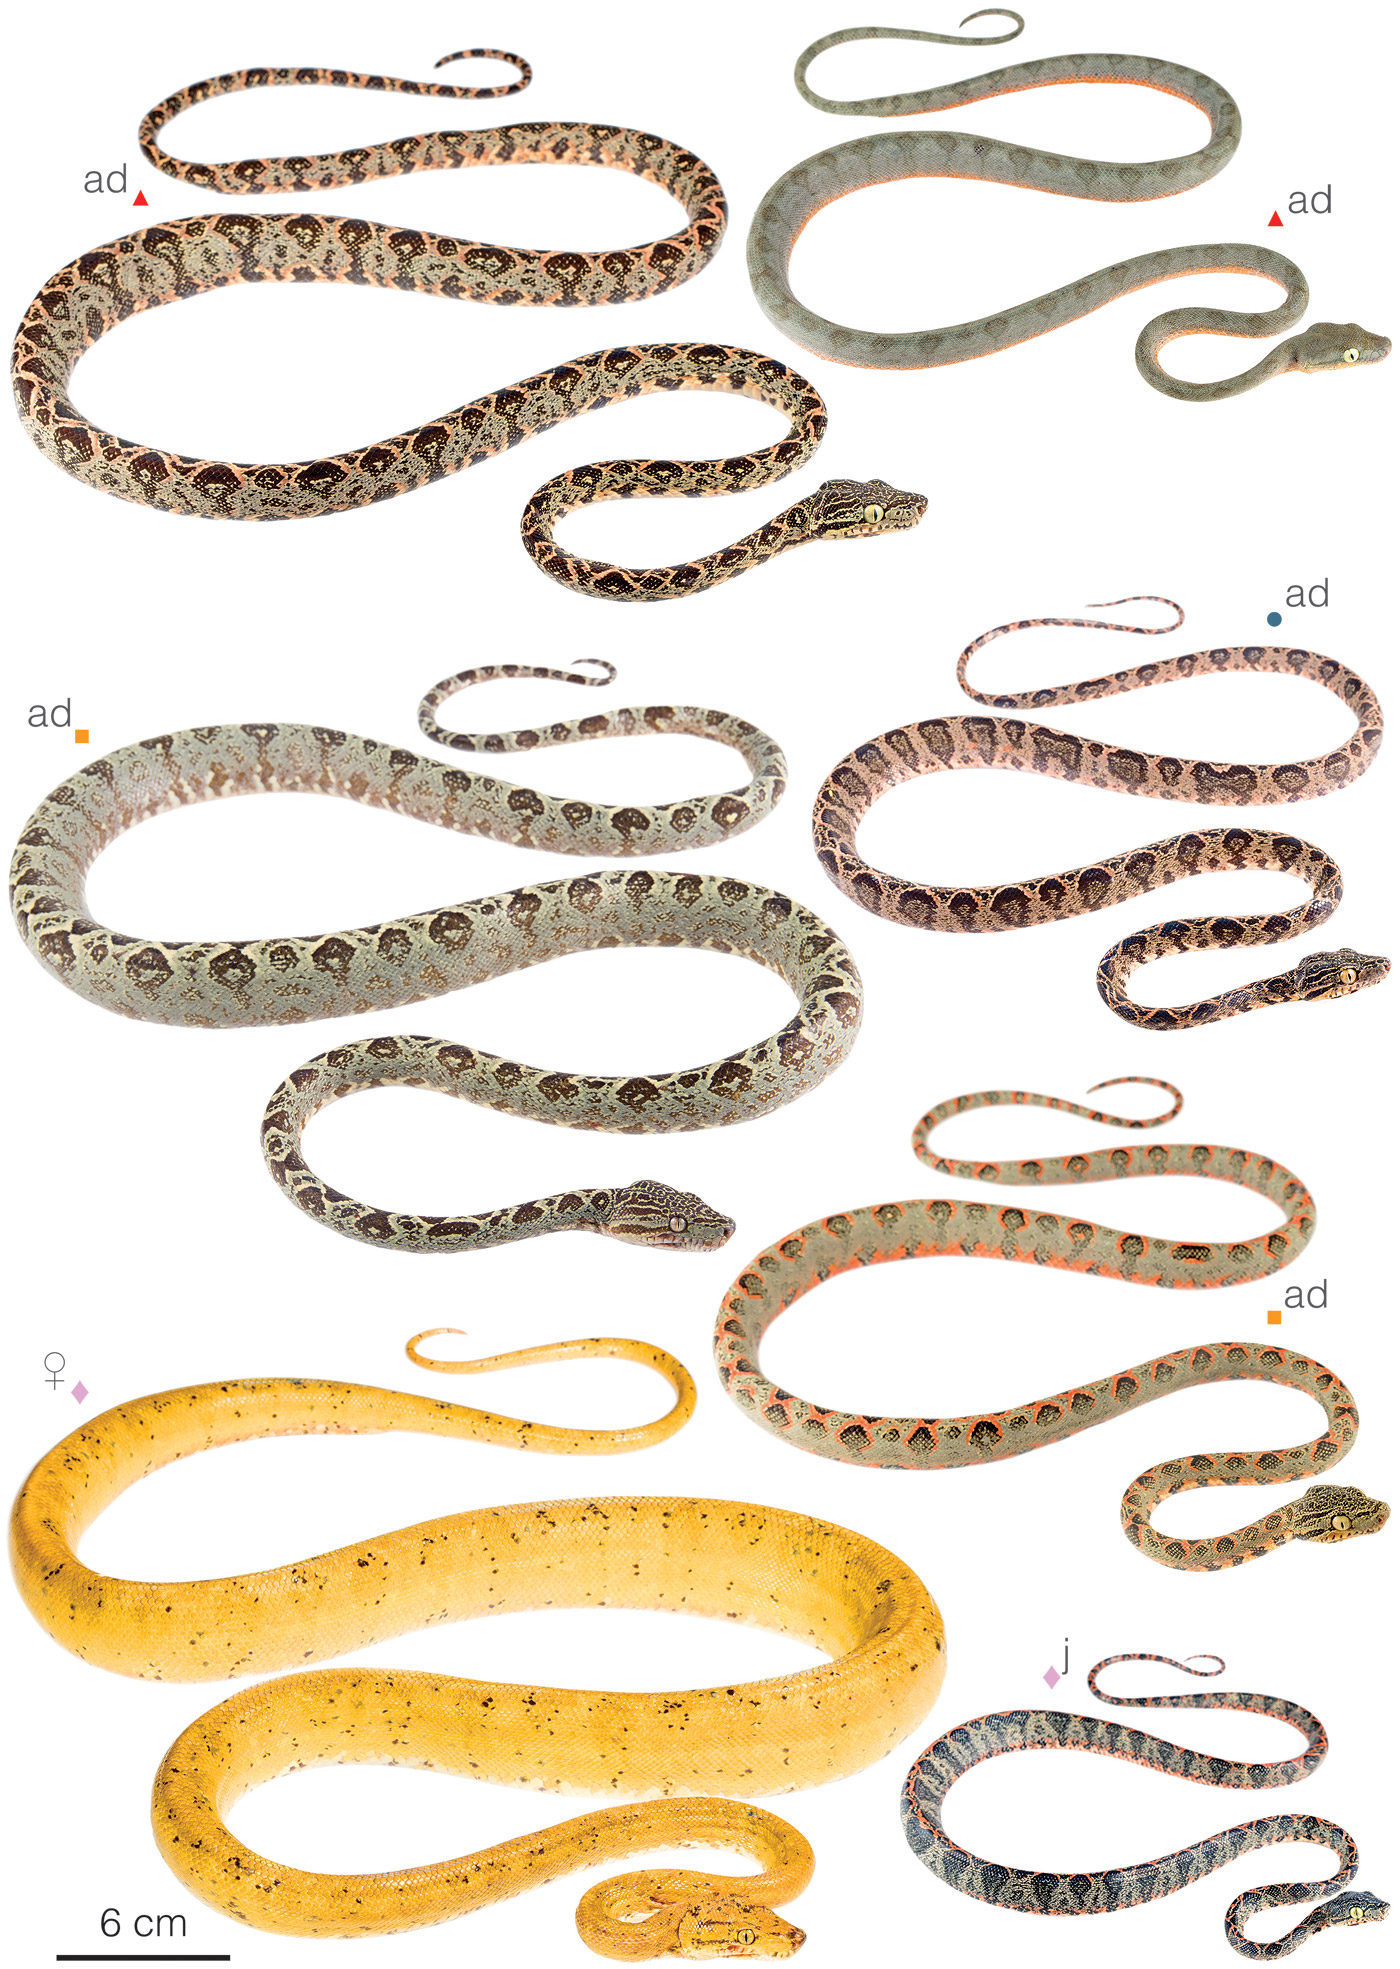 Figure showing an adult individual of Corallus hortulana